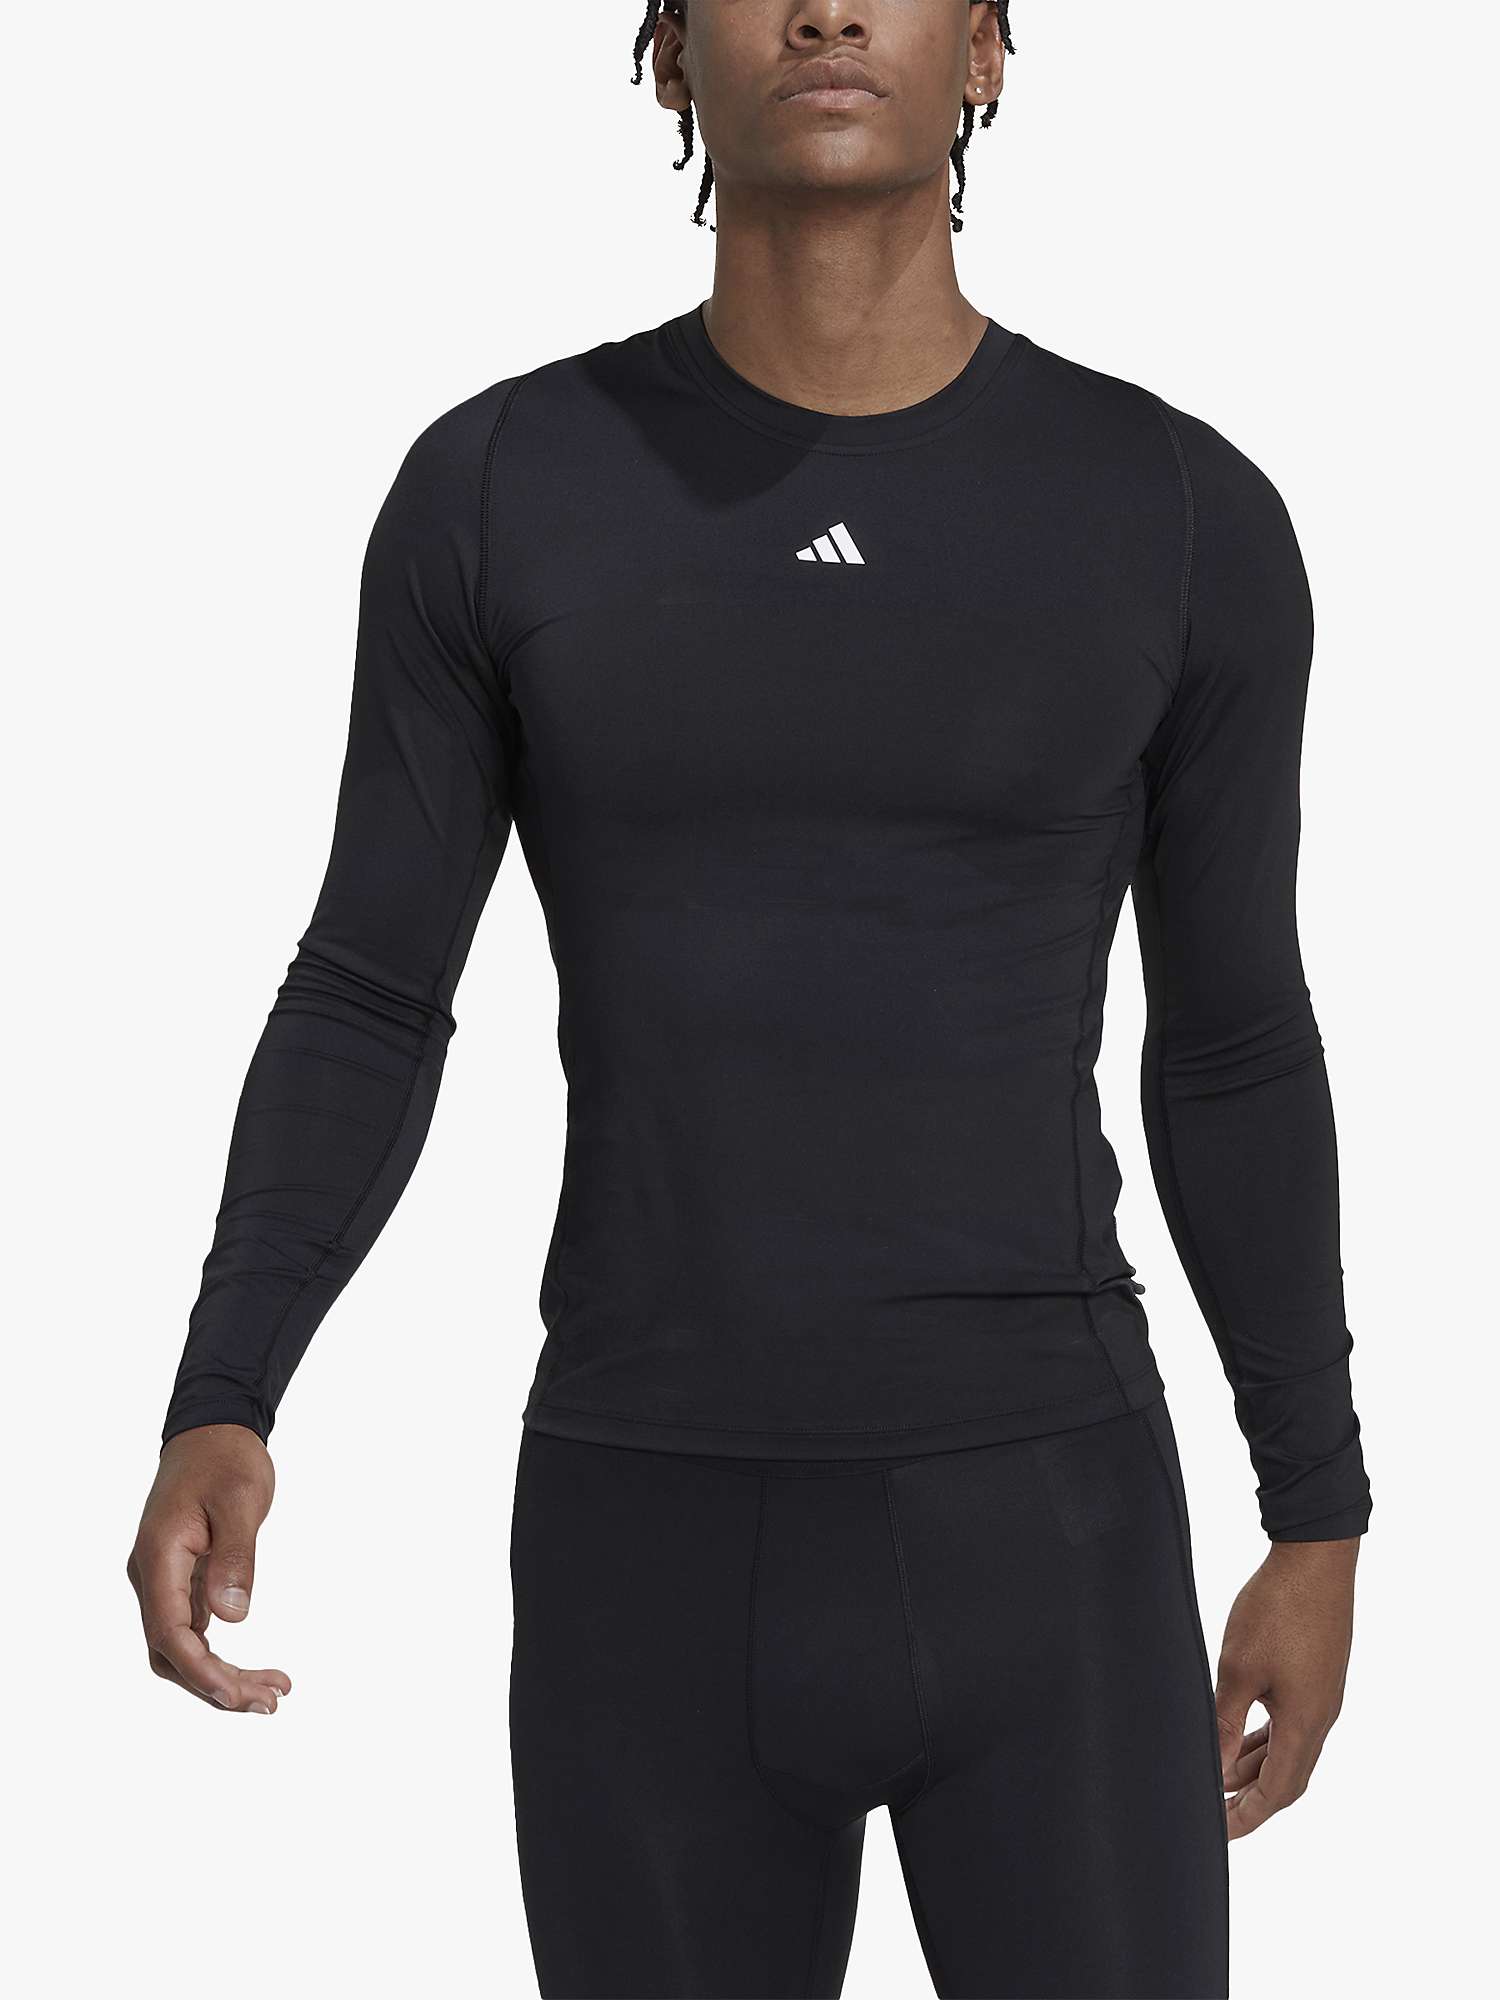 Buy adidas Techfit Long Sleeve Compression Gym Top Online at johnlewis.com